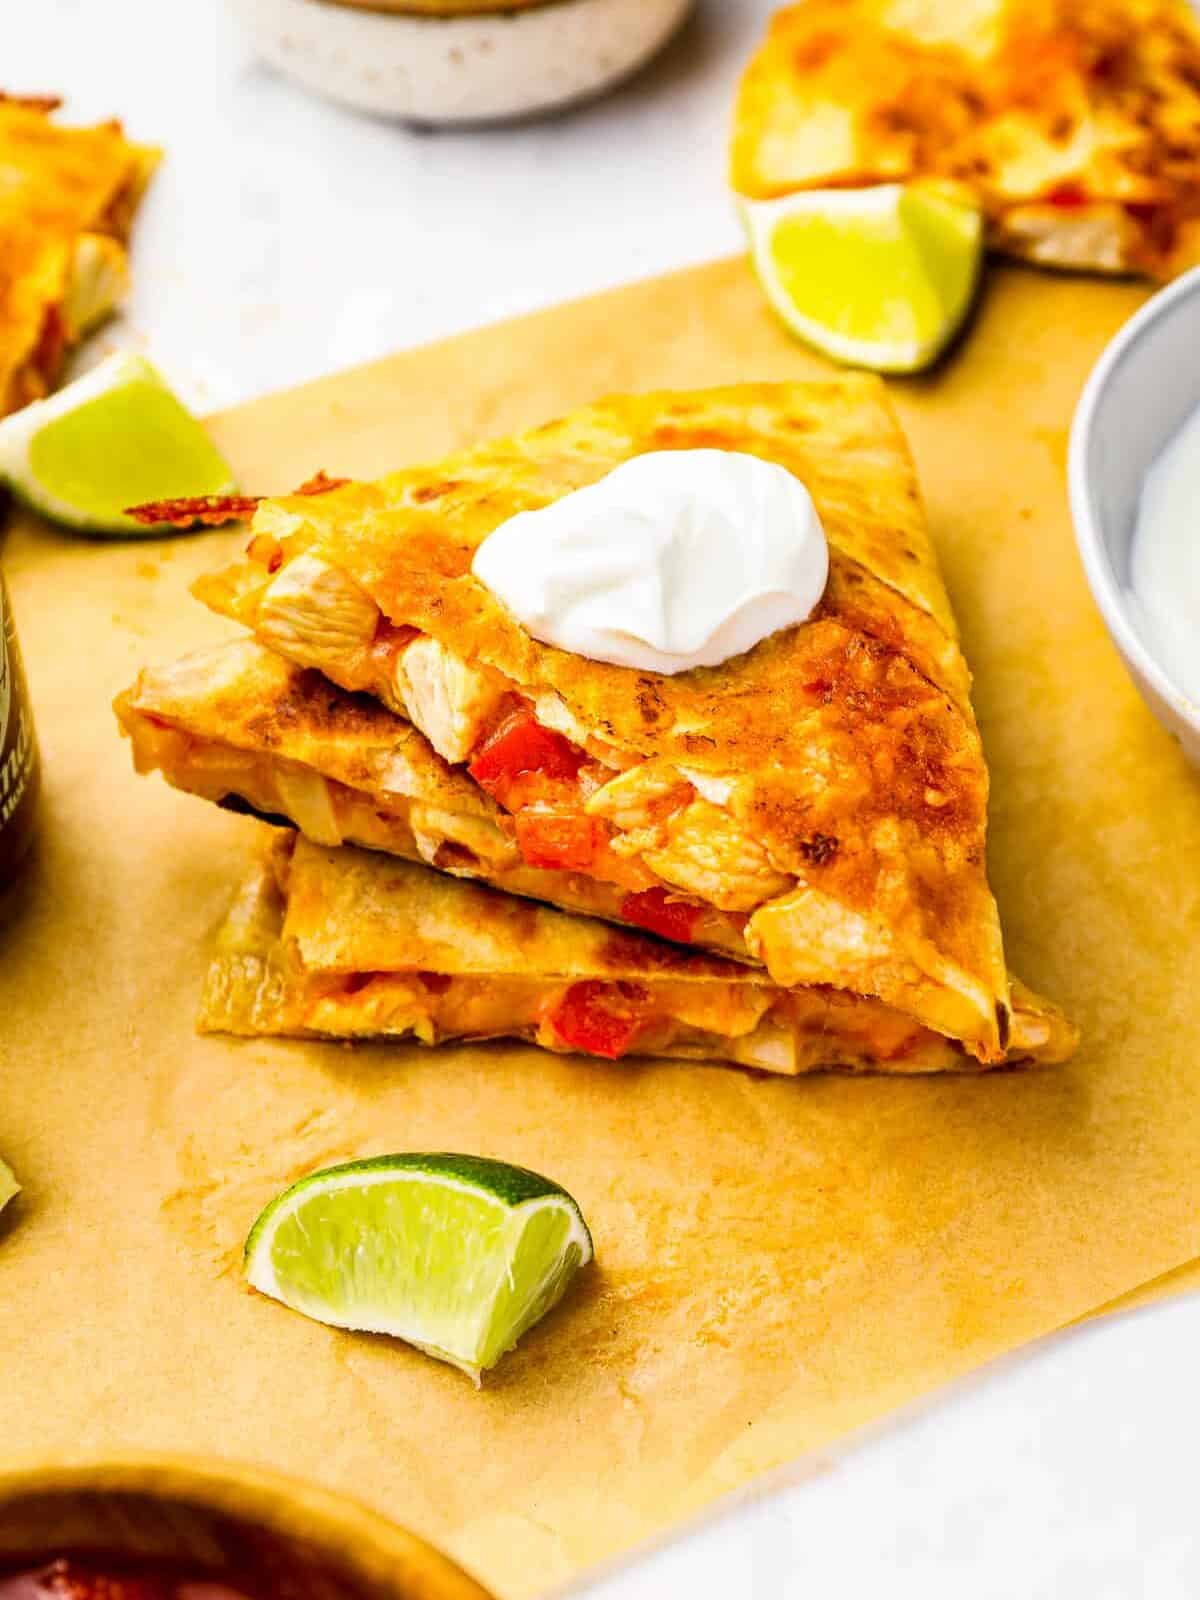 chicken quesadillas stacked on parchment paper with limes.